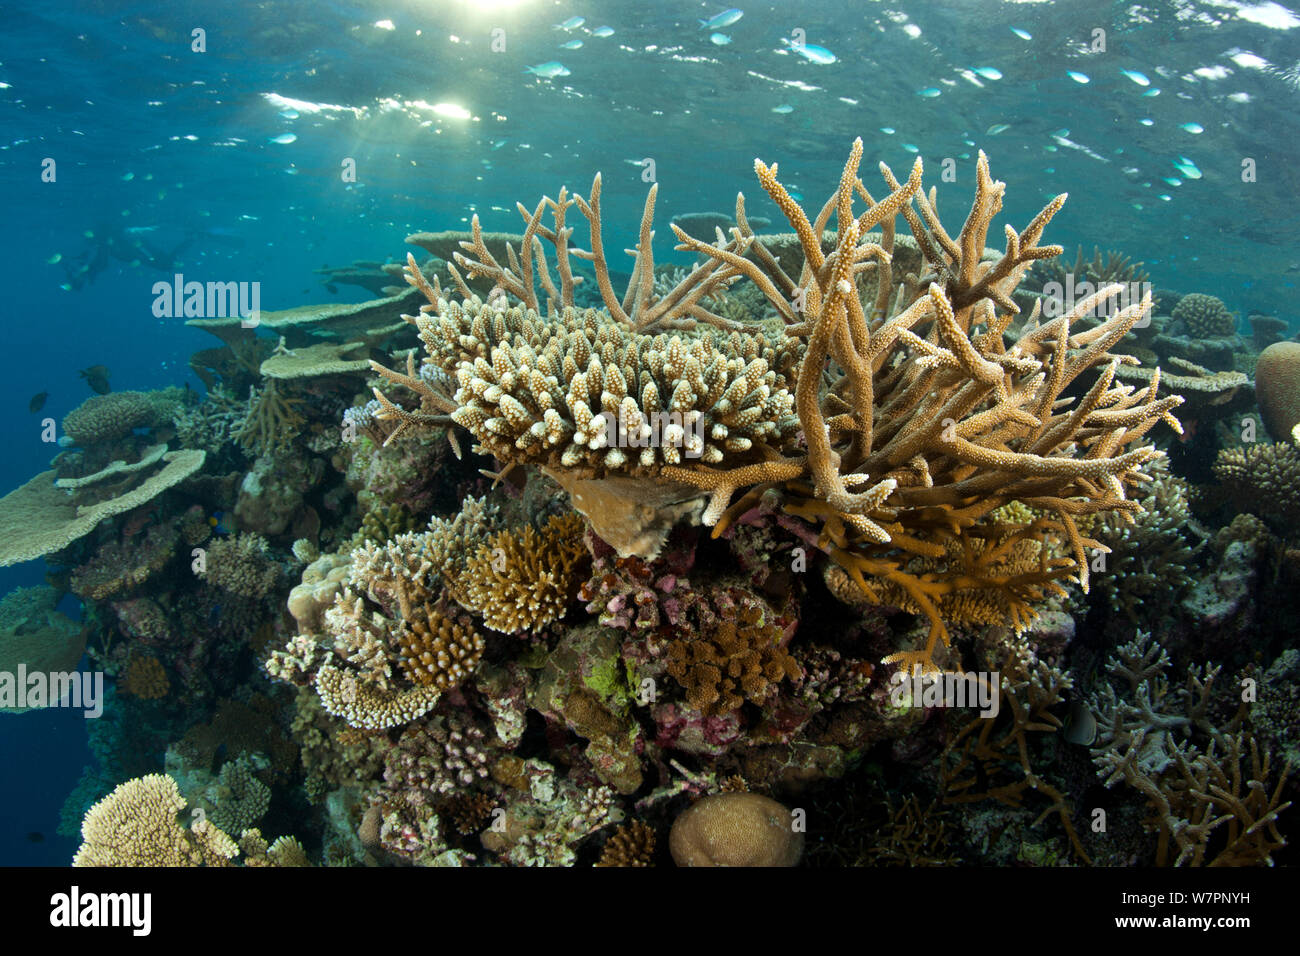 Reef covered with hard corals, Brush Coral (Acropora hyacinthus) Robust Acropora (Acropora robusta) and other Acropora, Maldives, Indian Ocean Stock Photo